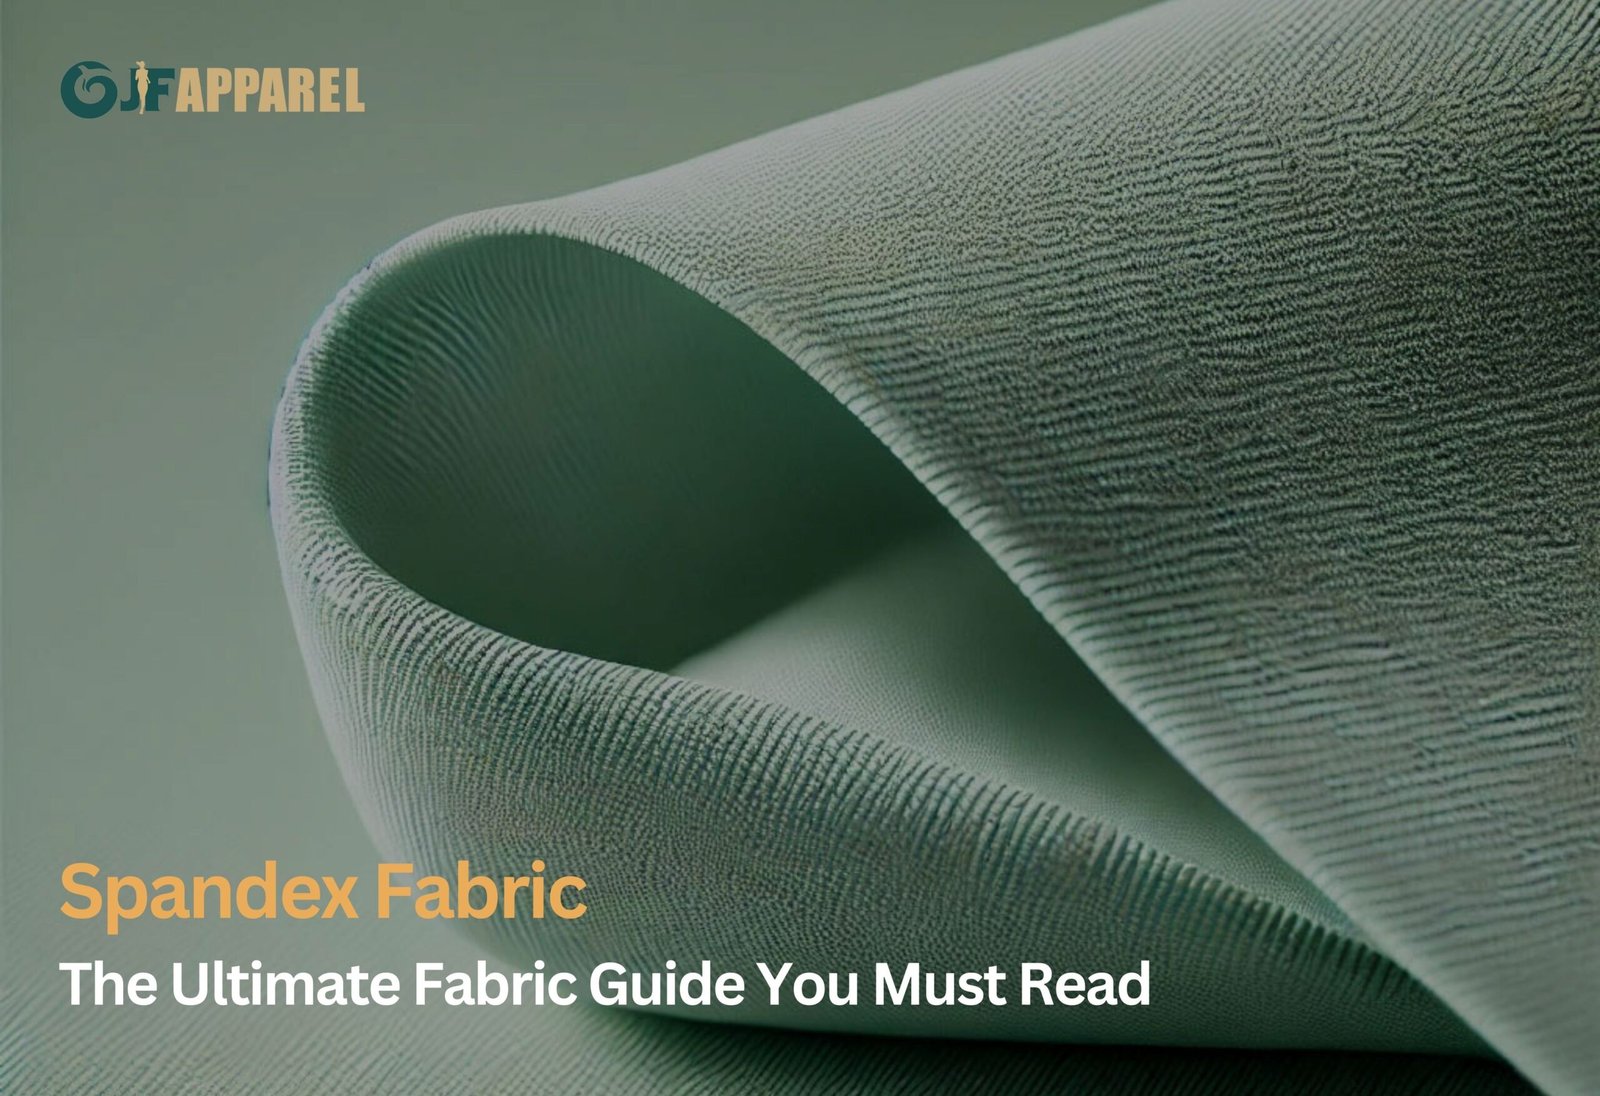 Spandex Fabric The Ultimate Fabric Guide You Must Read